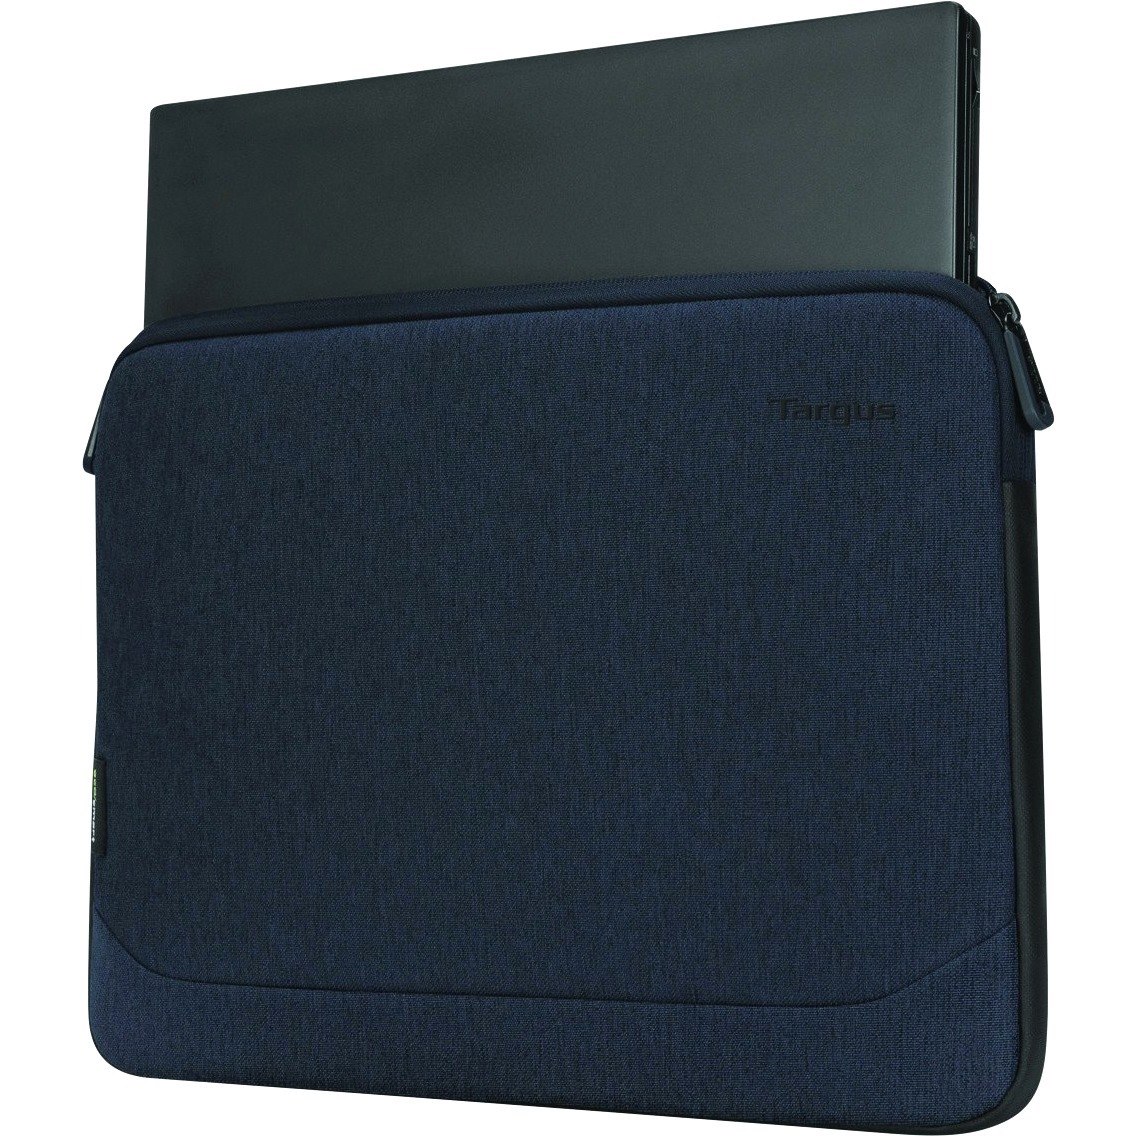 Targus Cypress TBS64901GL Carrying Case (Sleeve) for 27.9 cm (11") to 30.5 cm (12") Notebook - Navy